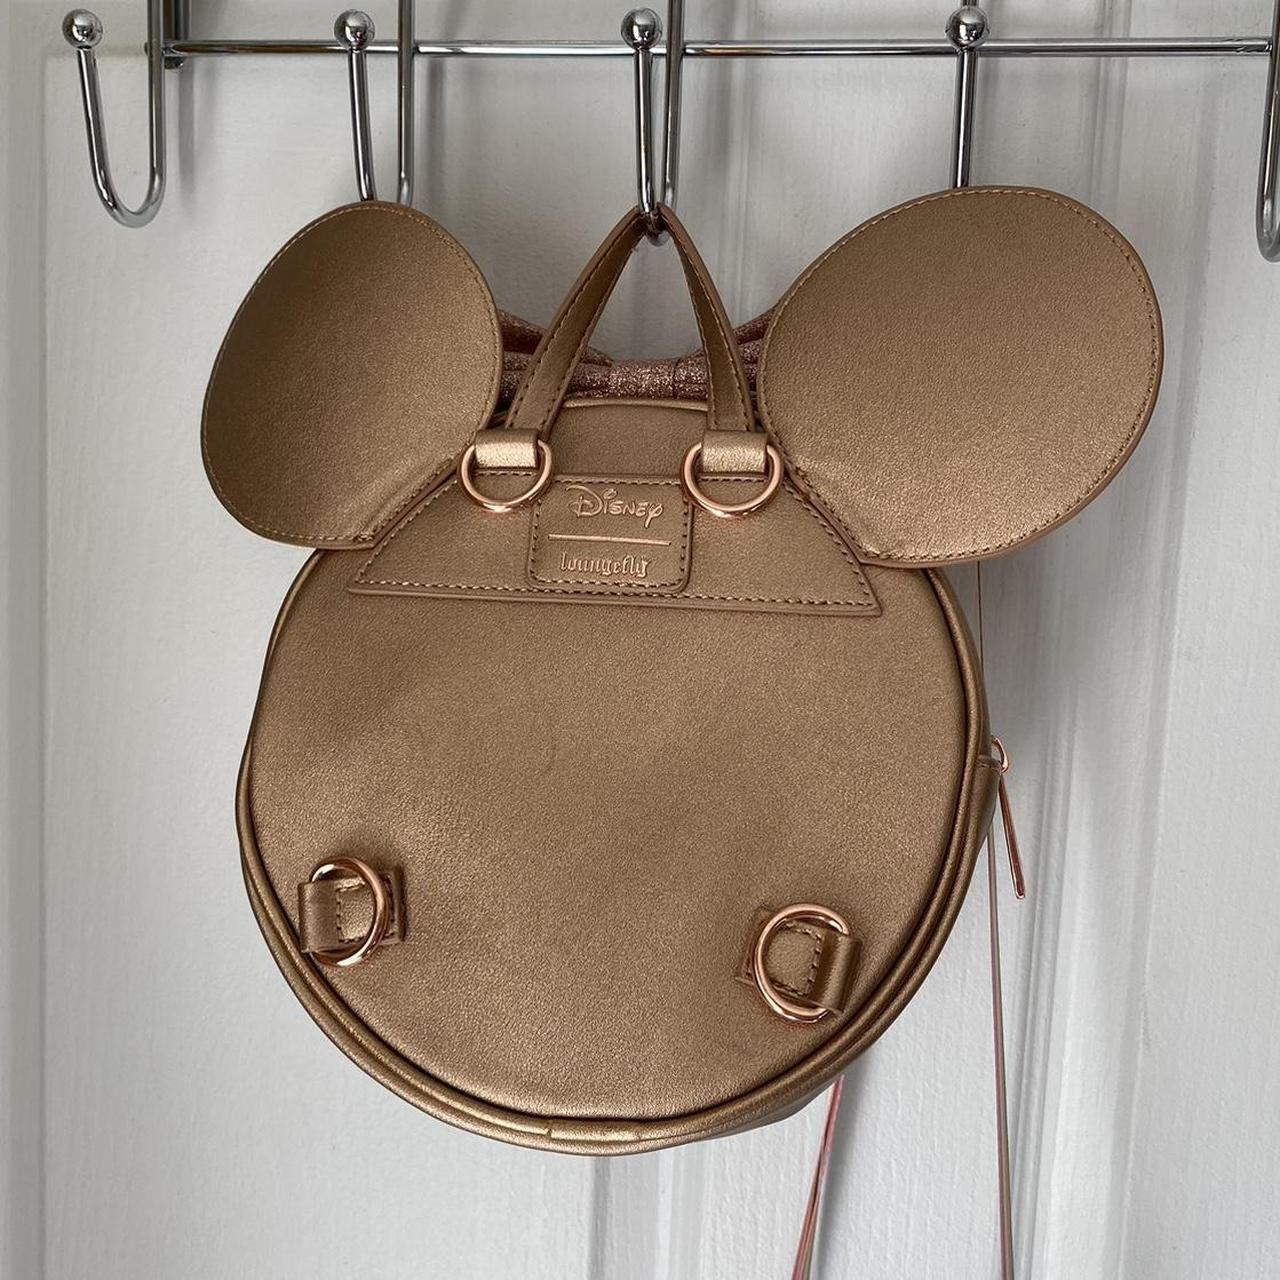 How to use strap on new disney pin bag｜TikTok Search